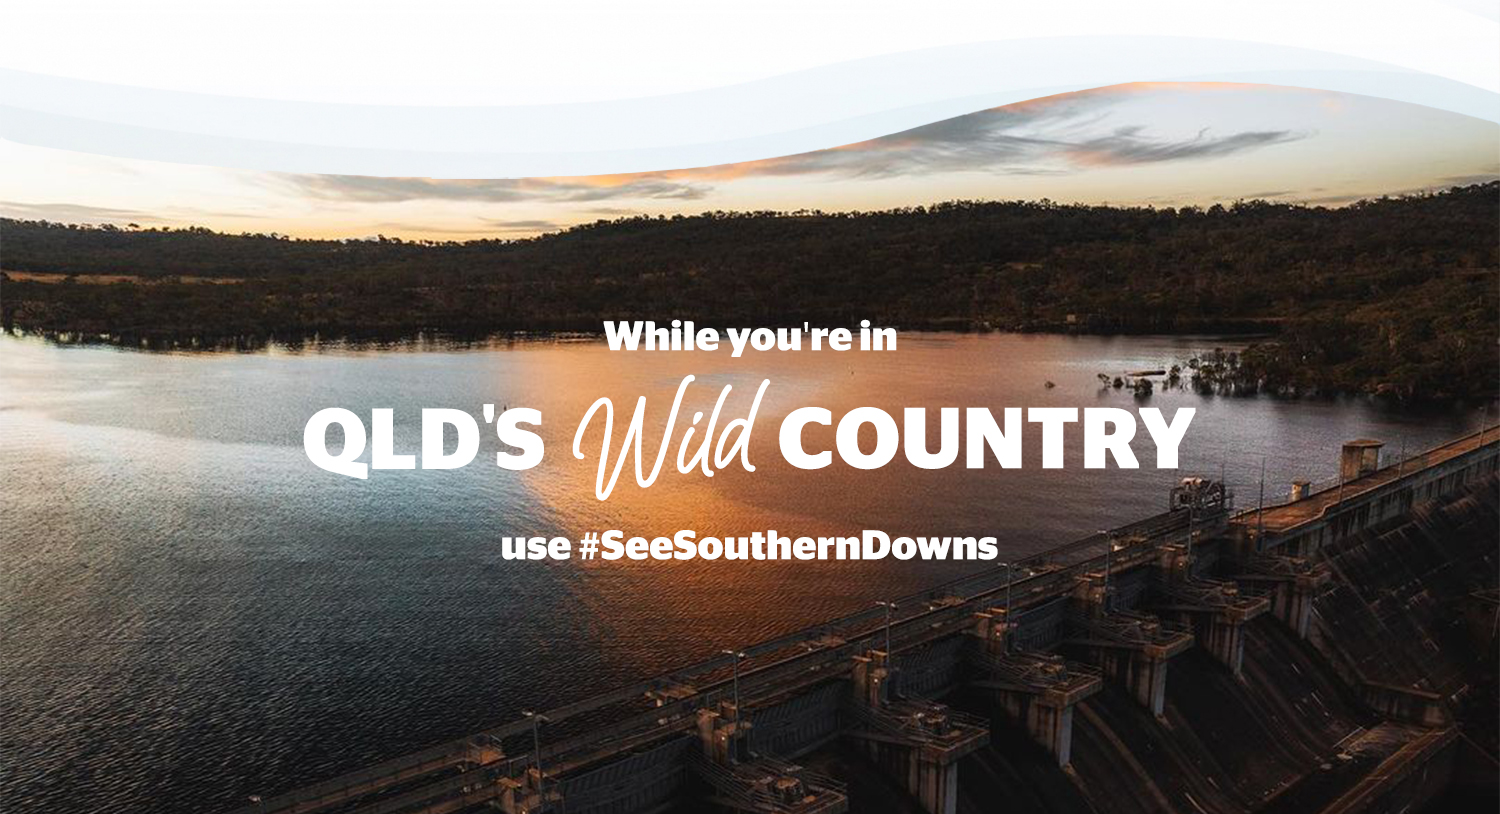 QLD's Wild Country Landing Page Footer #seesoutherndowns